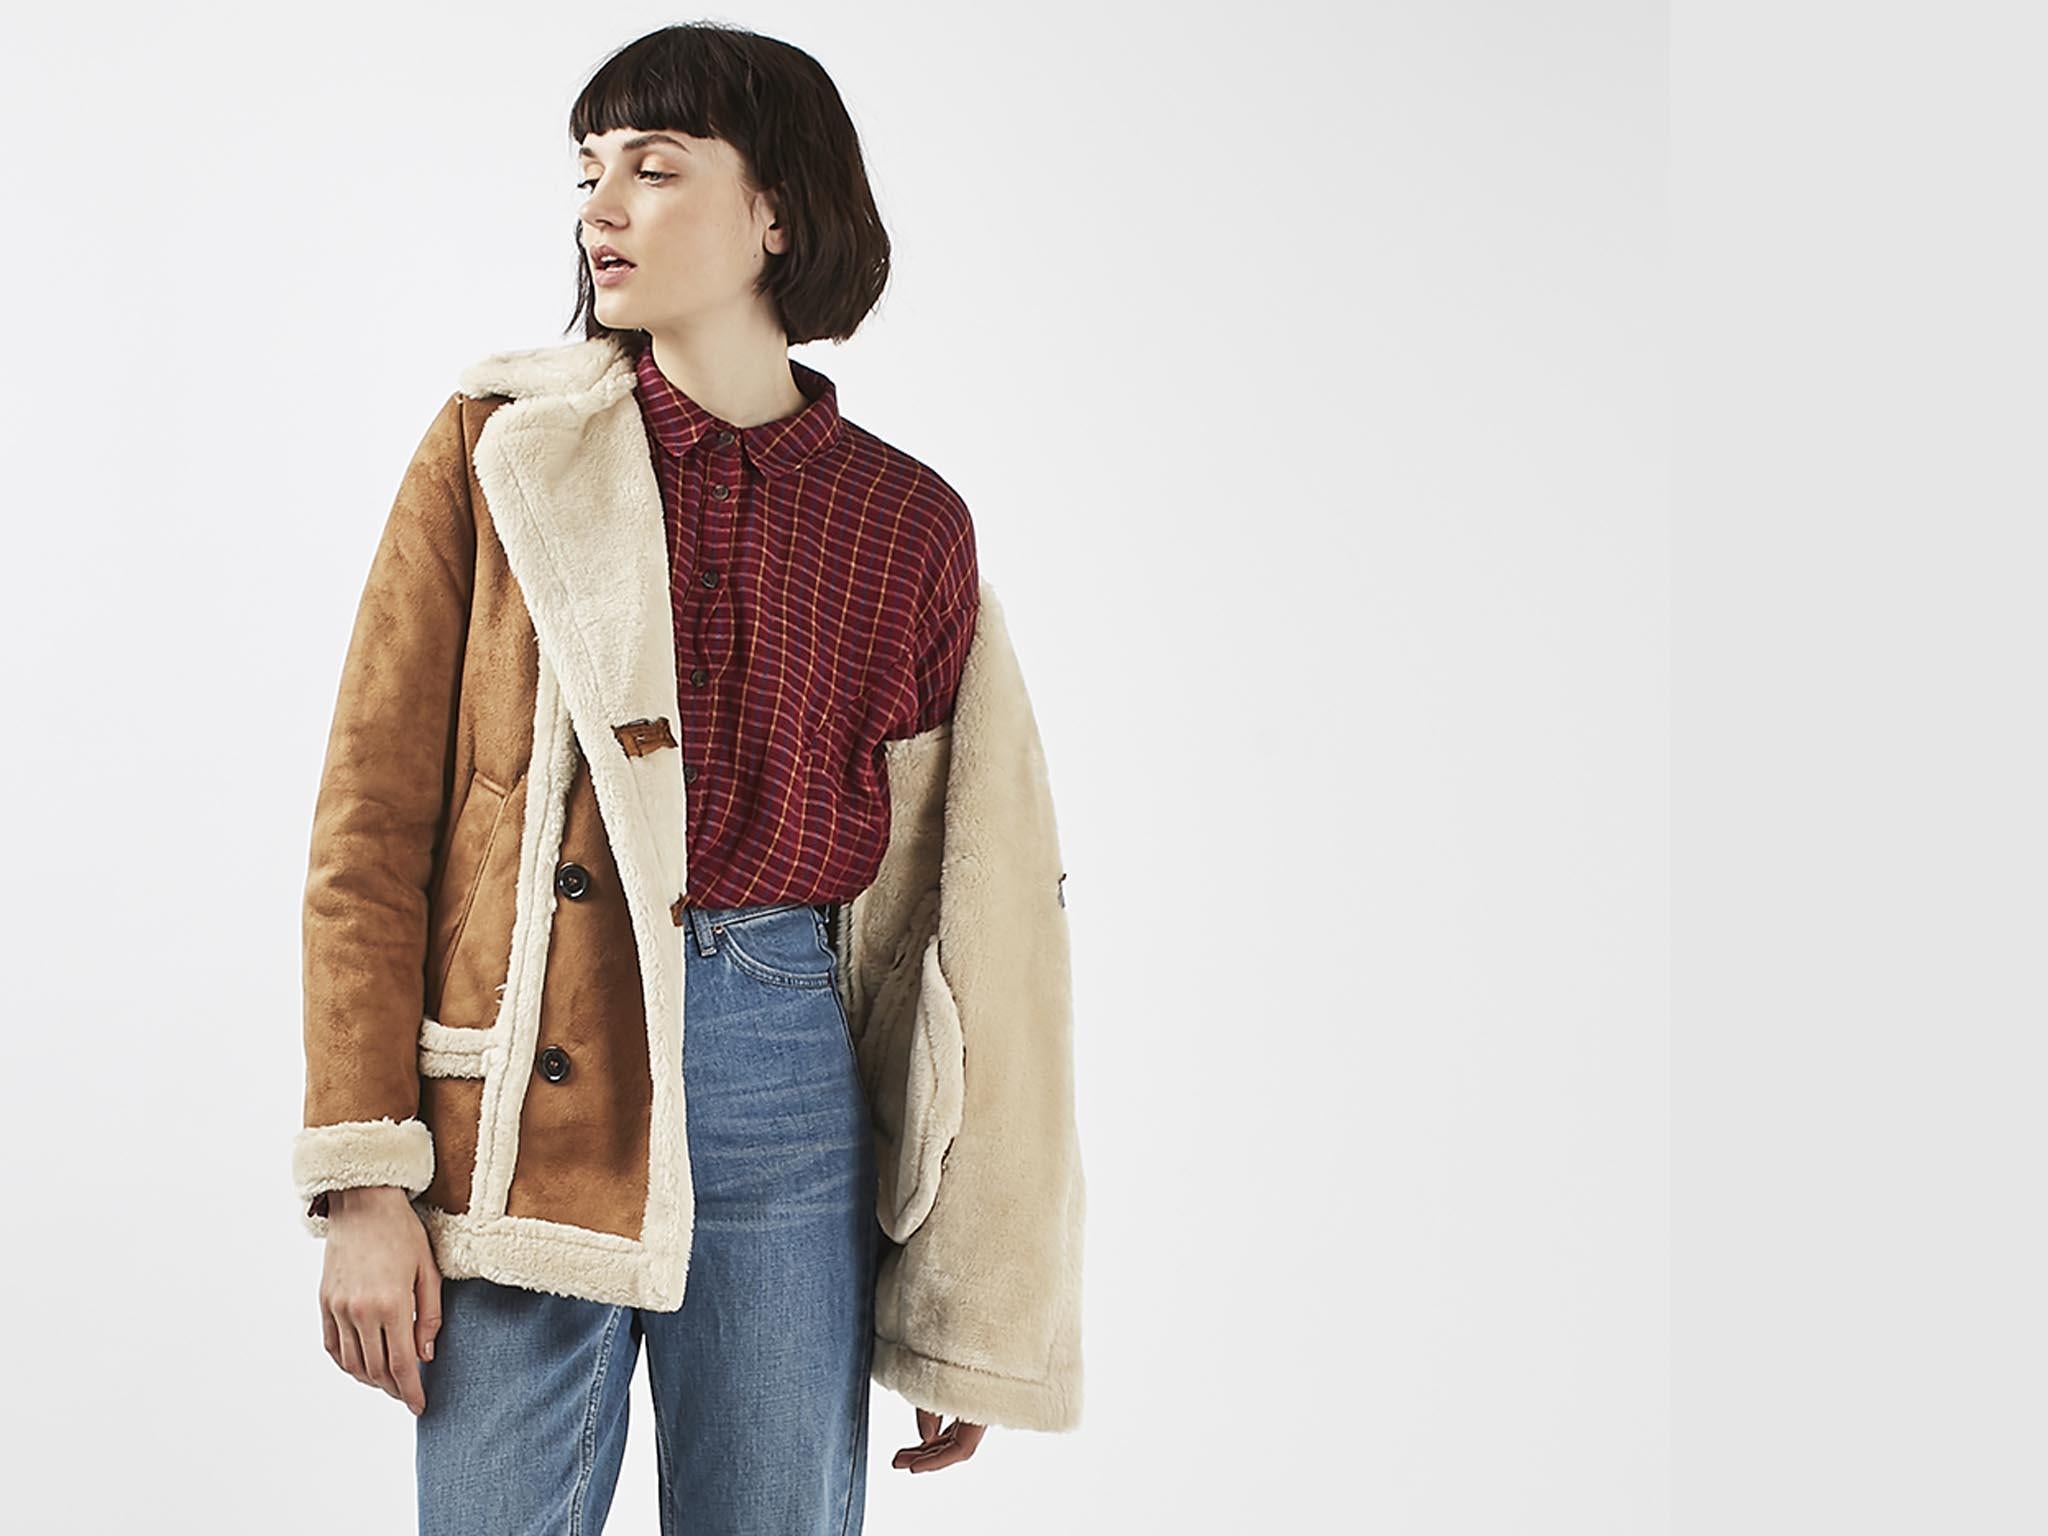 https://static.independent.co.uk/s3fs-public/thumbnails/image/2016/11/03/16/topshop-shearling-lead-image.jpg